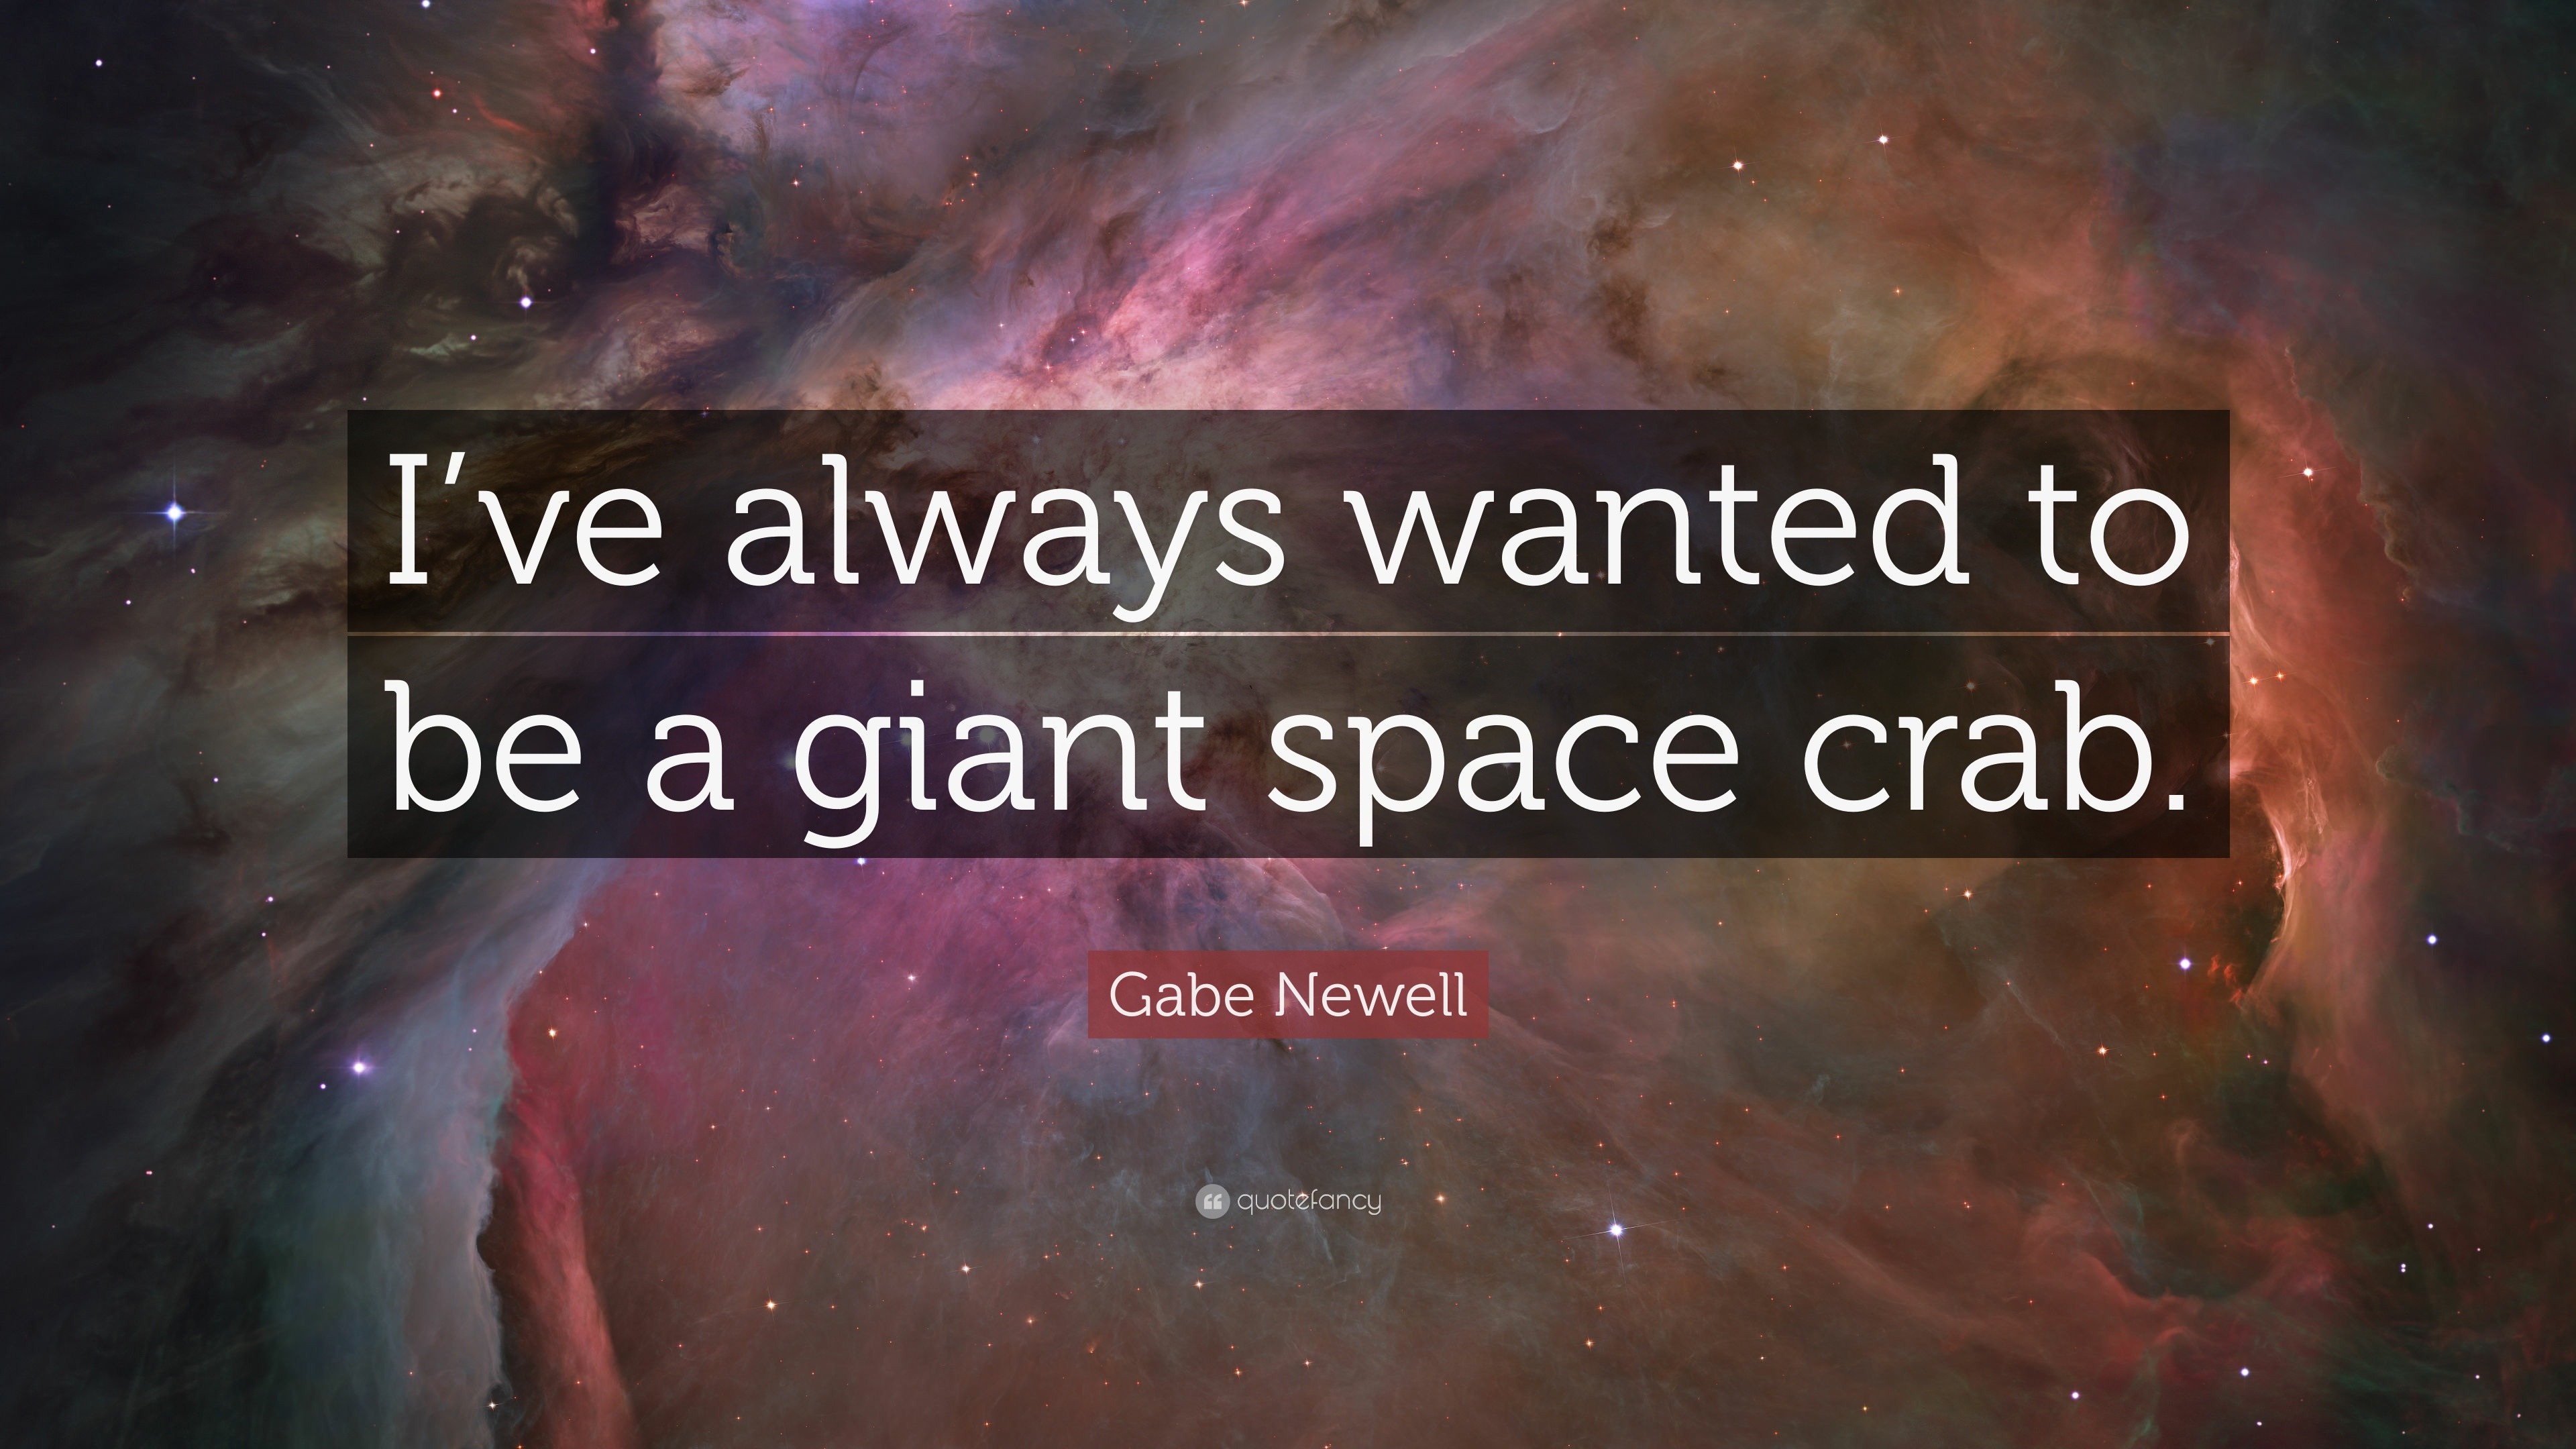 Gabe Newell Quotes (40 wallpapers) - Quotefancy